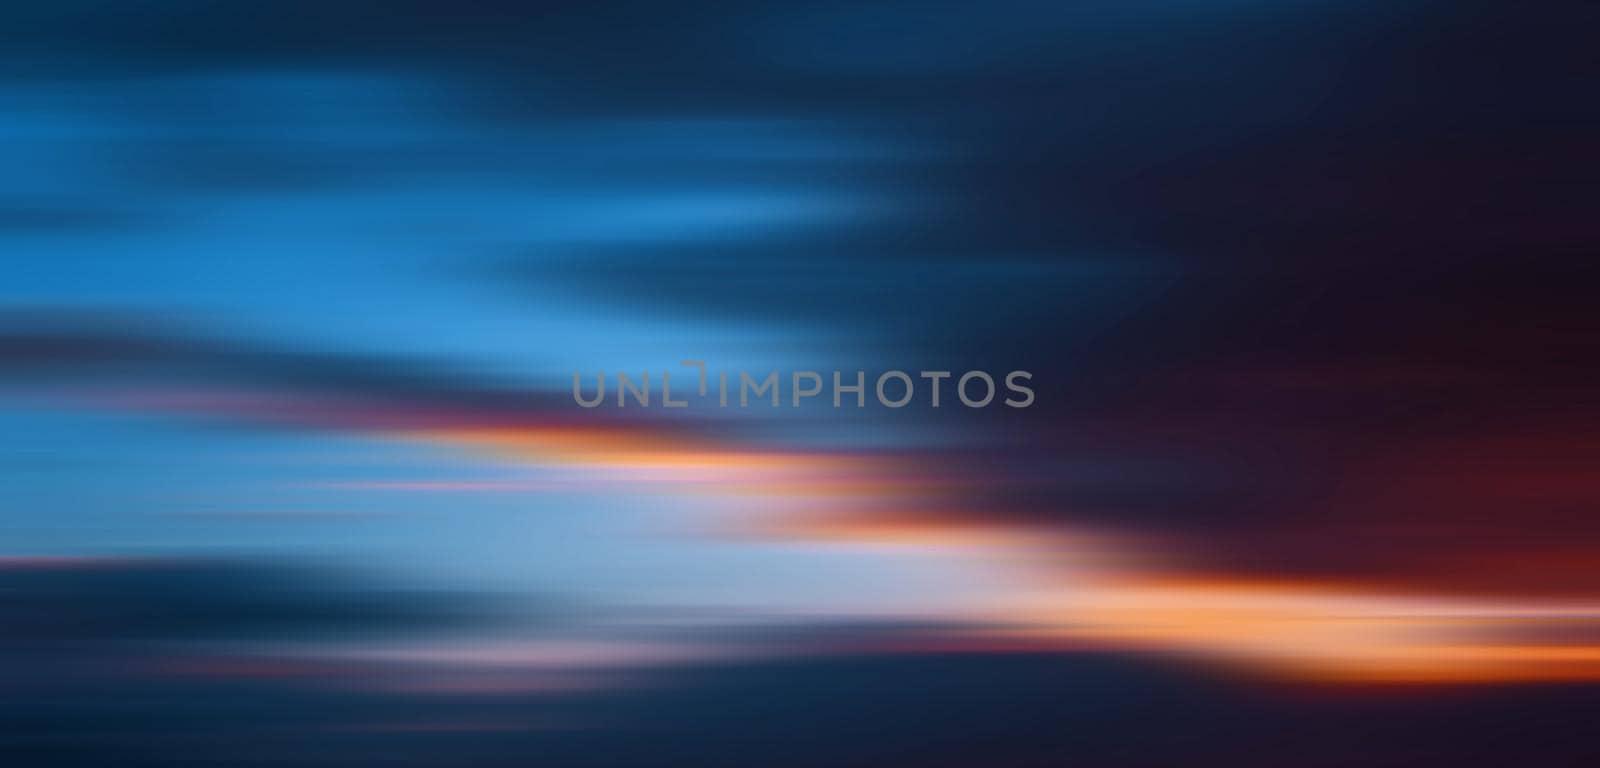 Clouds in motion blur by palinchak